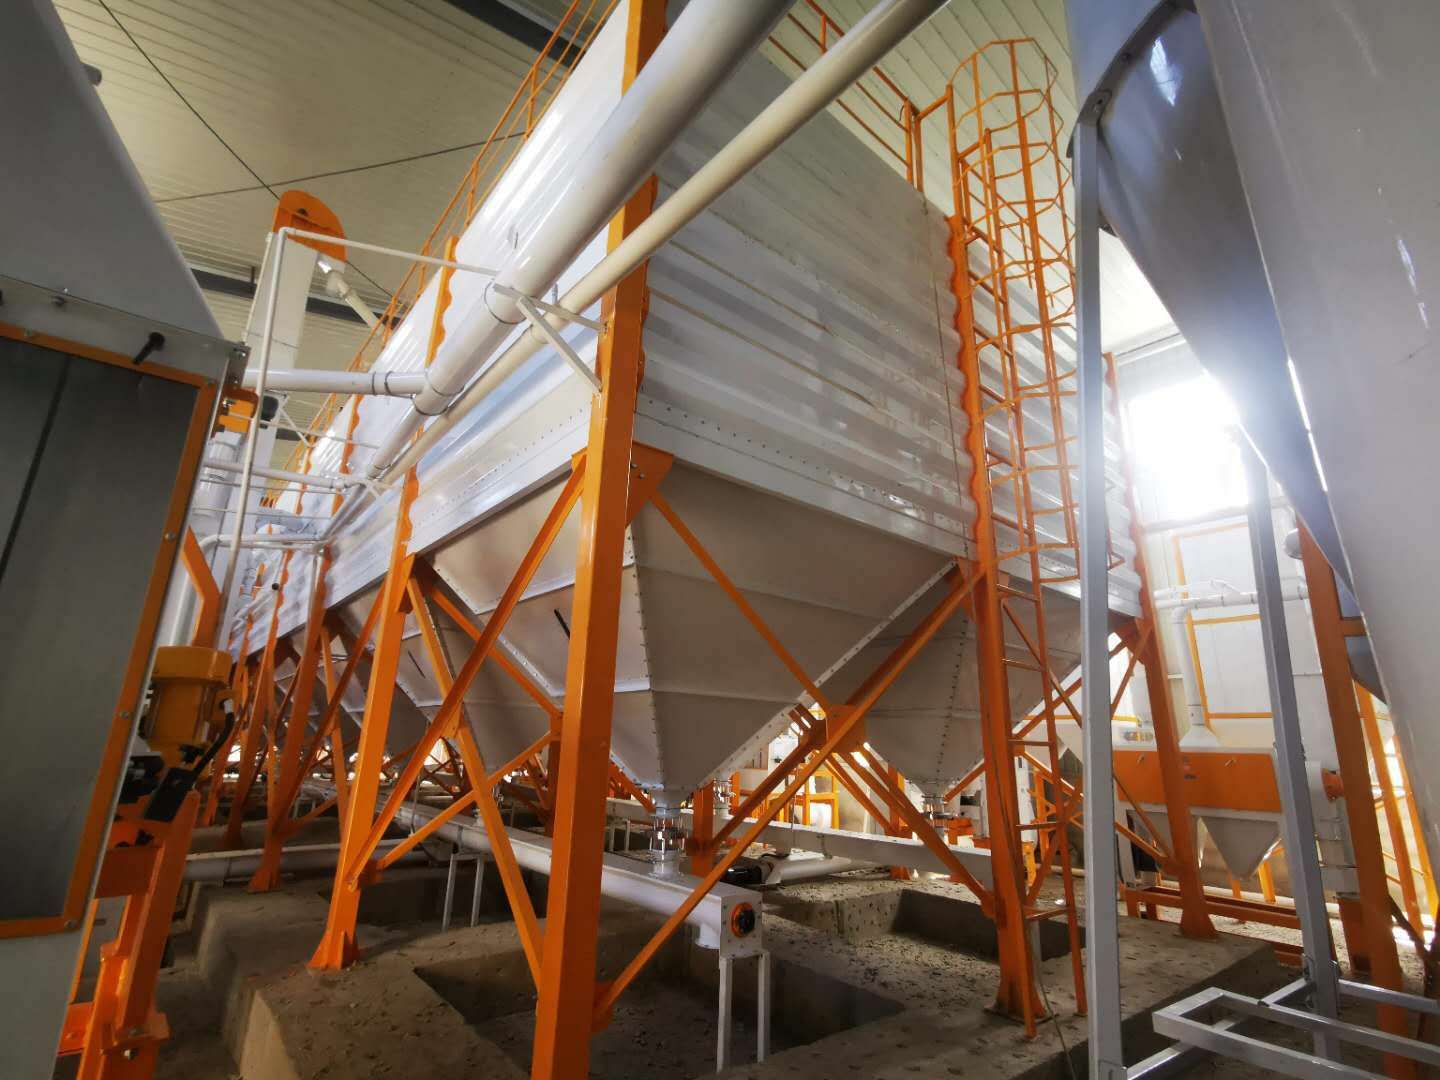 The whole wheat flour milling system includes wheat flour milling system, purification system and screening system to form a continuous flour production process. The main equipment includes wheat flour units, purifiers, square sieves, etc.